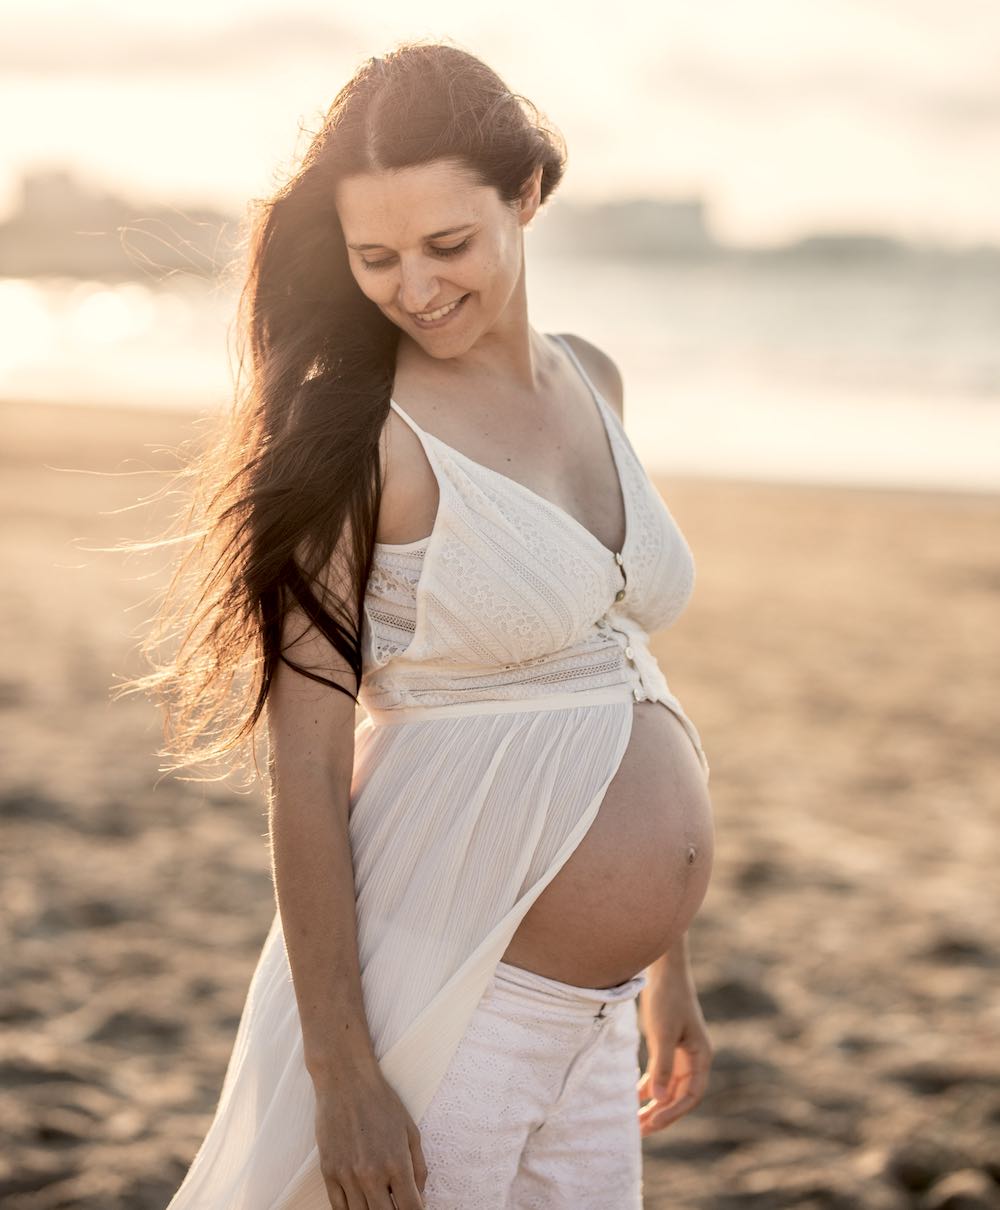 Pregnant Lady On The Beach | Cute Maternity Jeans To Flaunt That Baby Bump